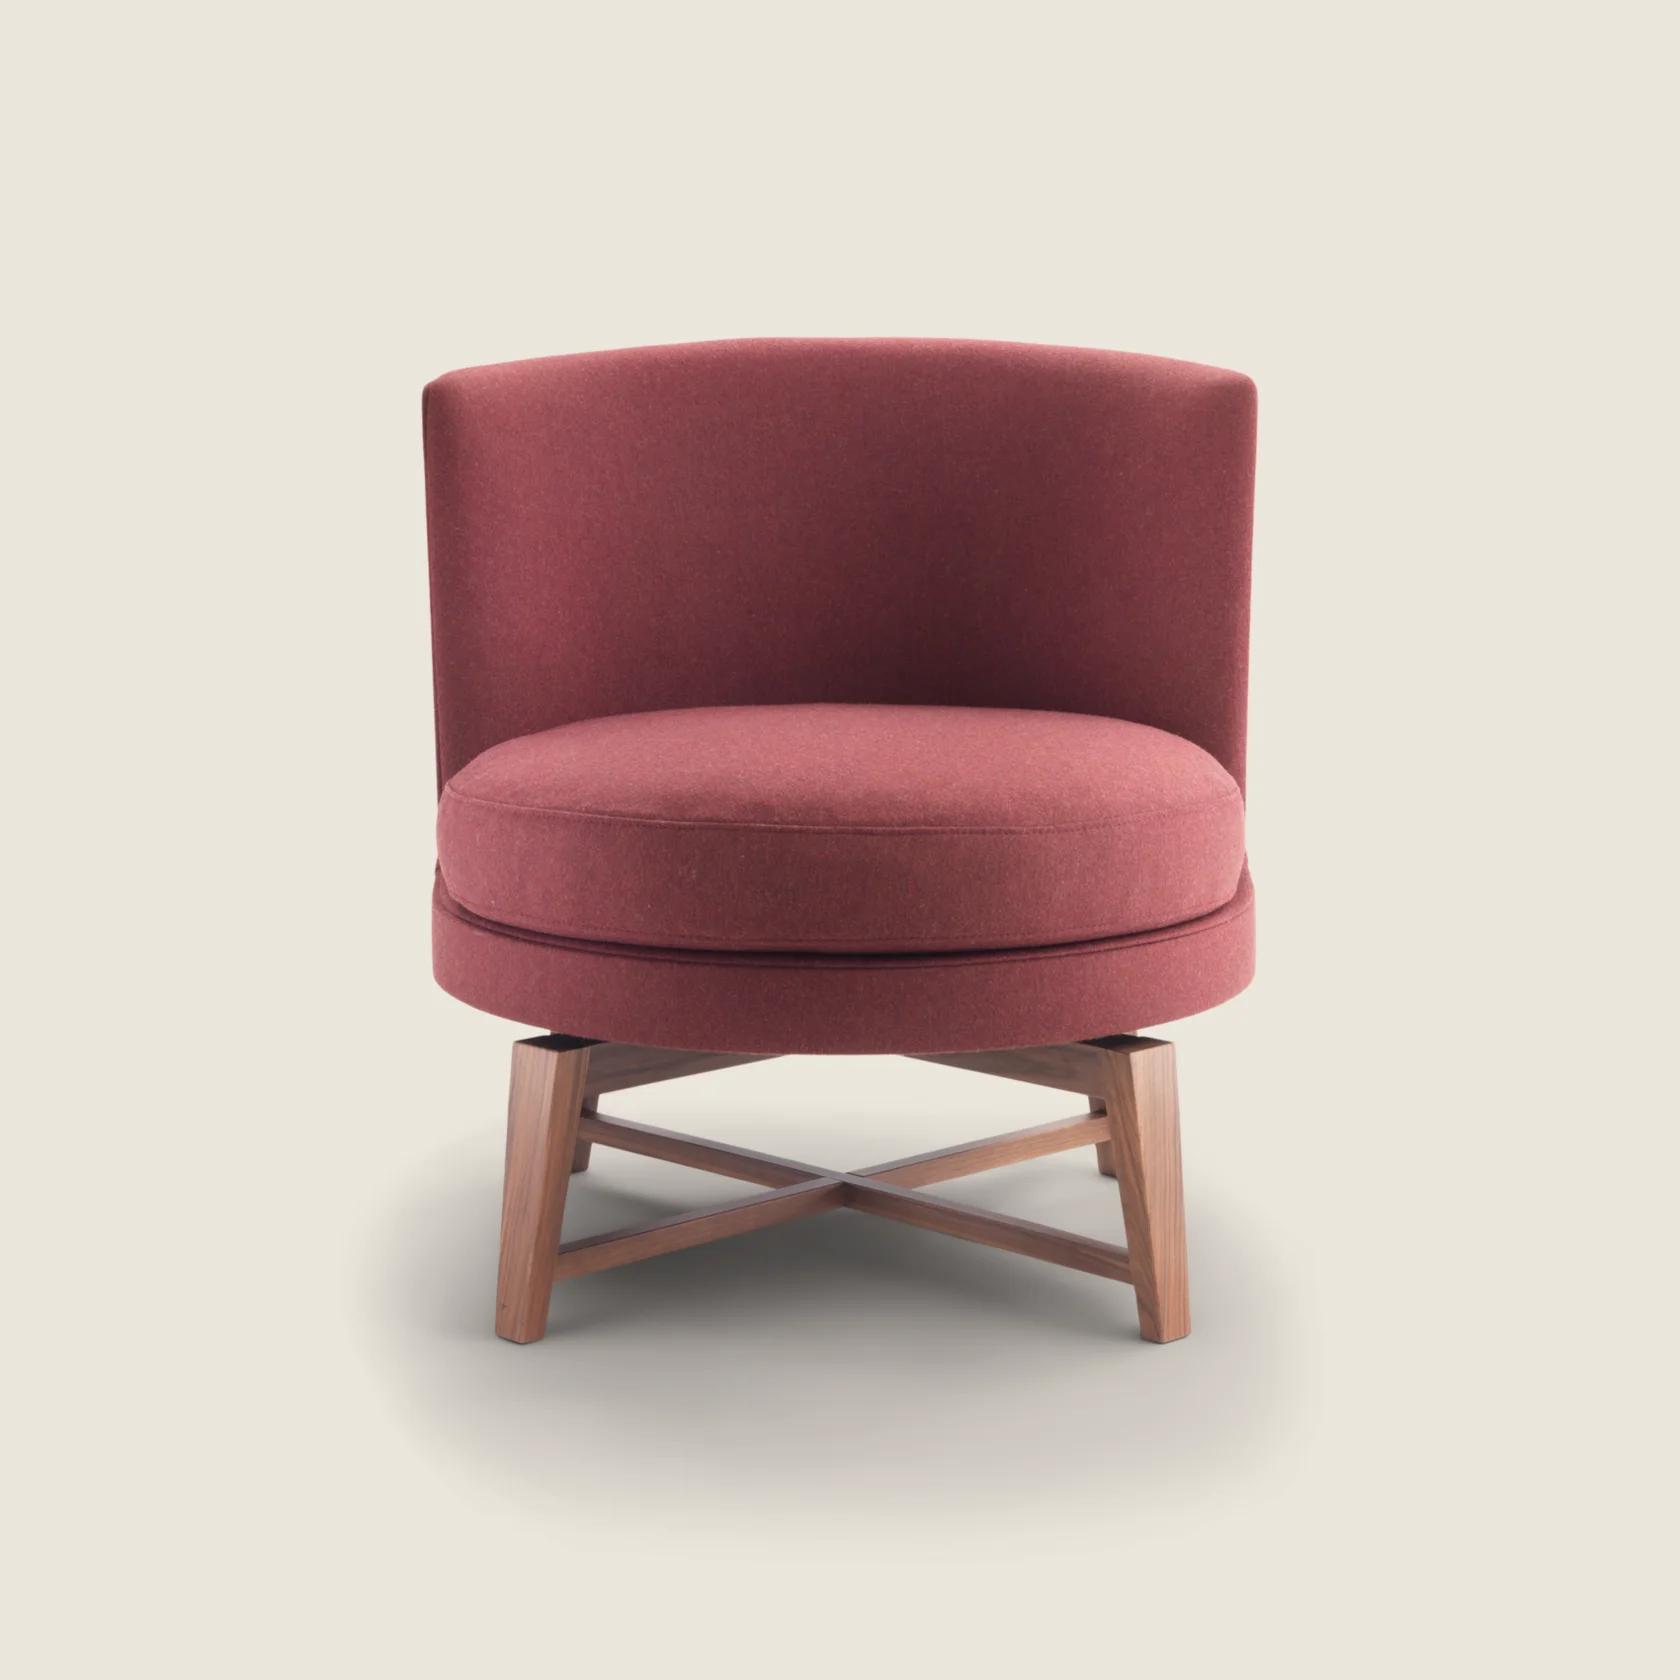 FEEL GOOD Armchairs | Design Made in Italy - Flexform